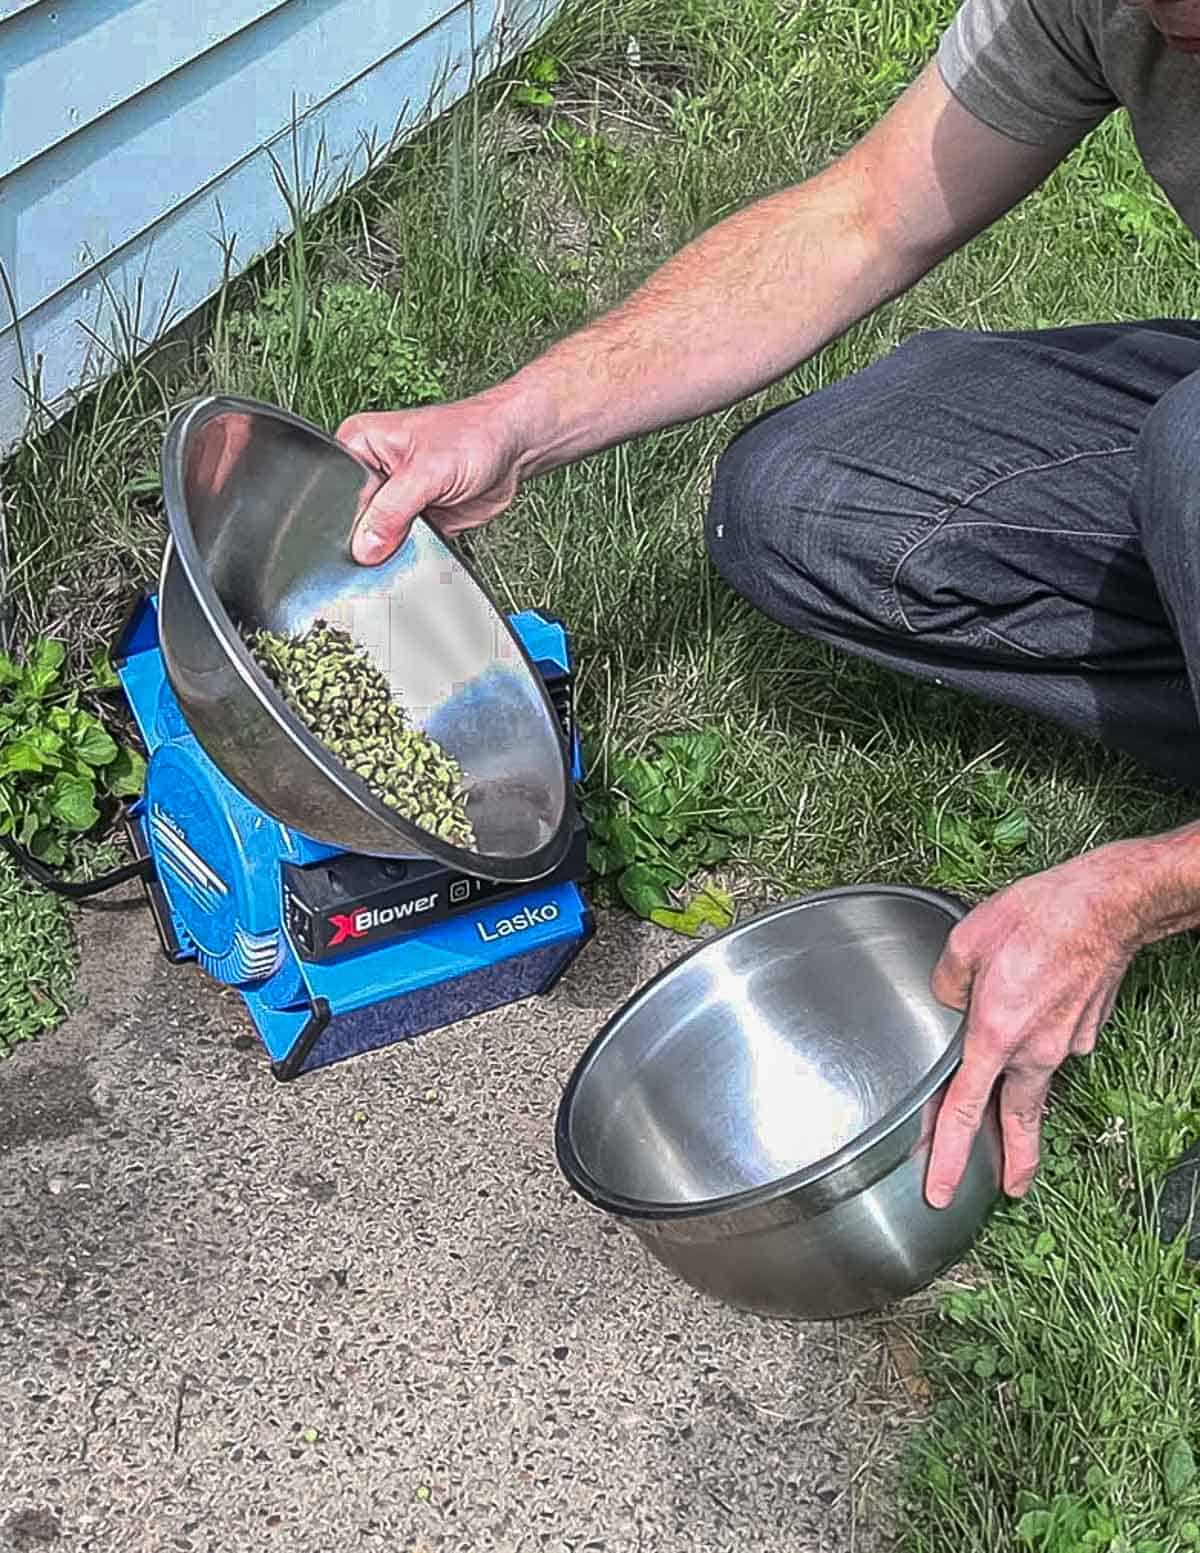 Winnowing basswood seeds using a box fan and metal bowls. 